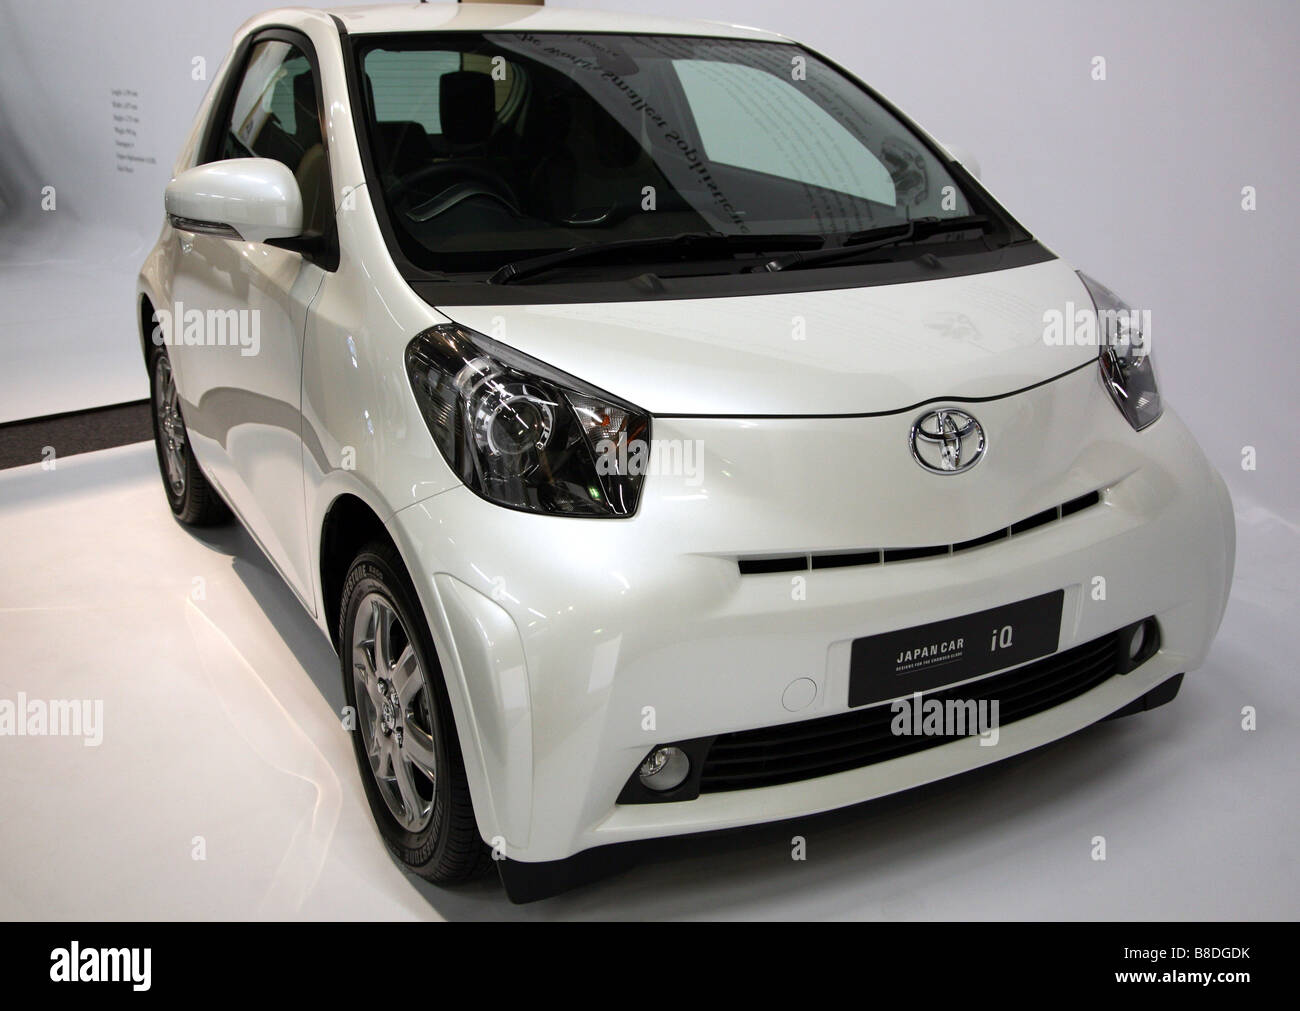 Toyota IQ 4 seater city car EDITORIAL USE ONLY Stock Photo